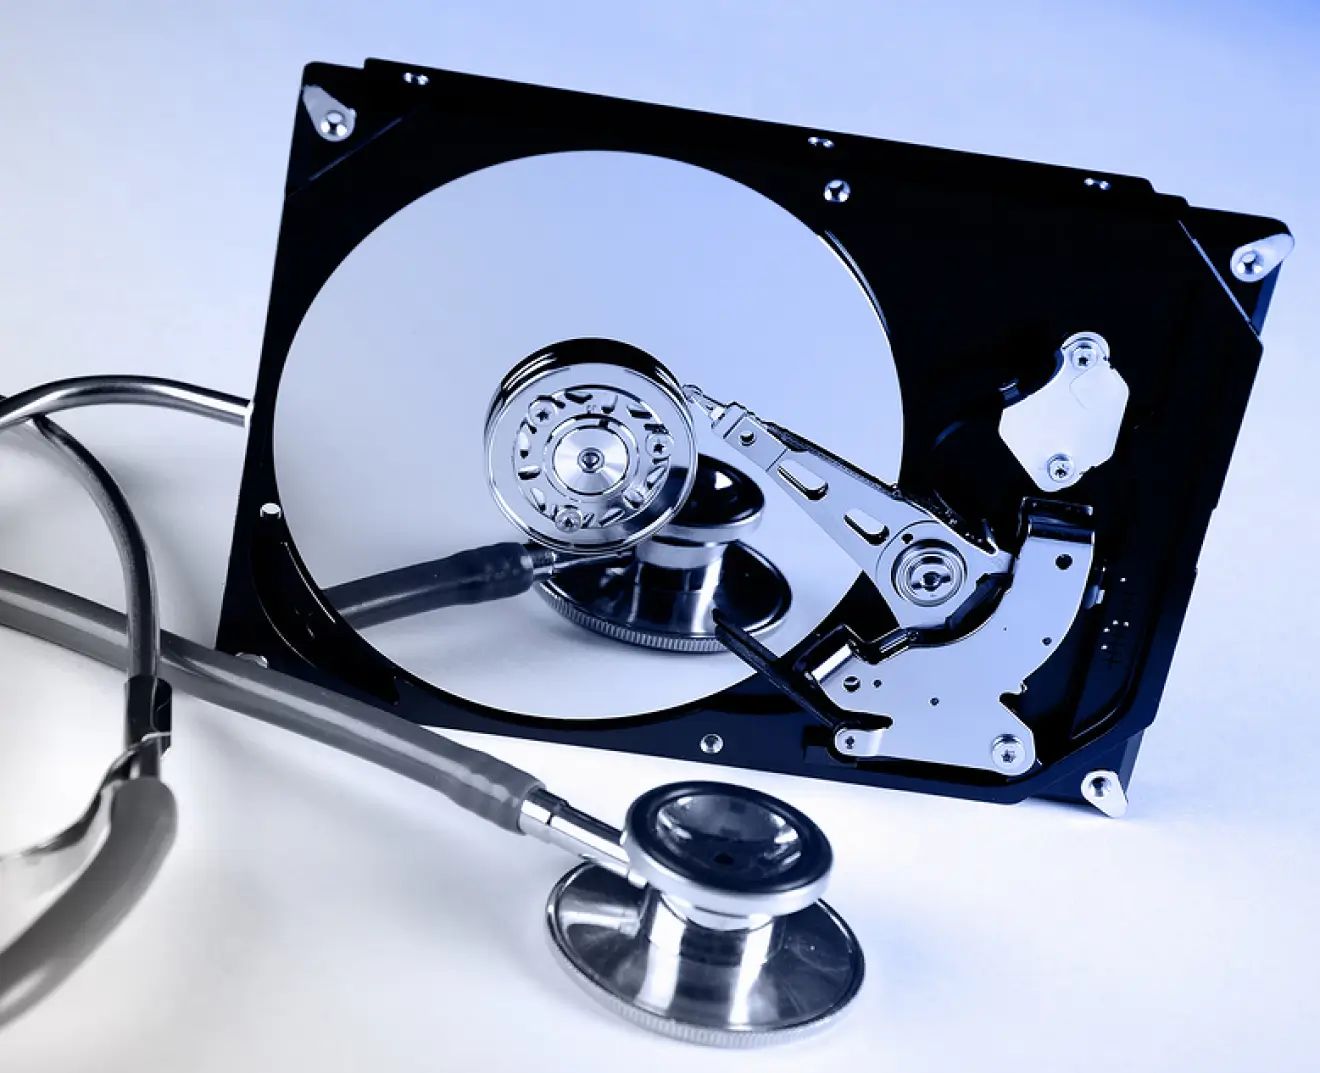 What Is A Bad Sector In Hard Disk Drive?